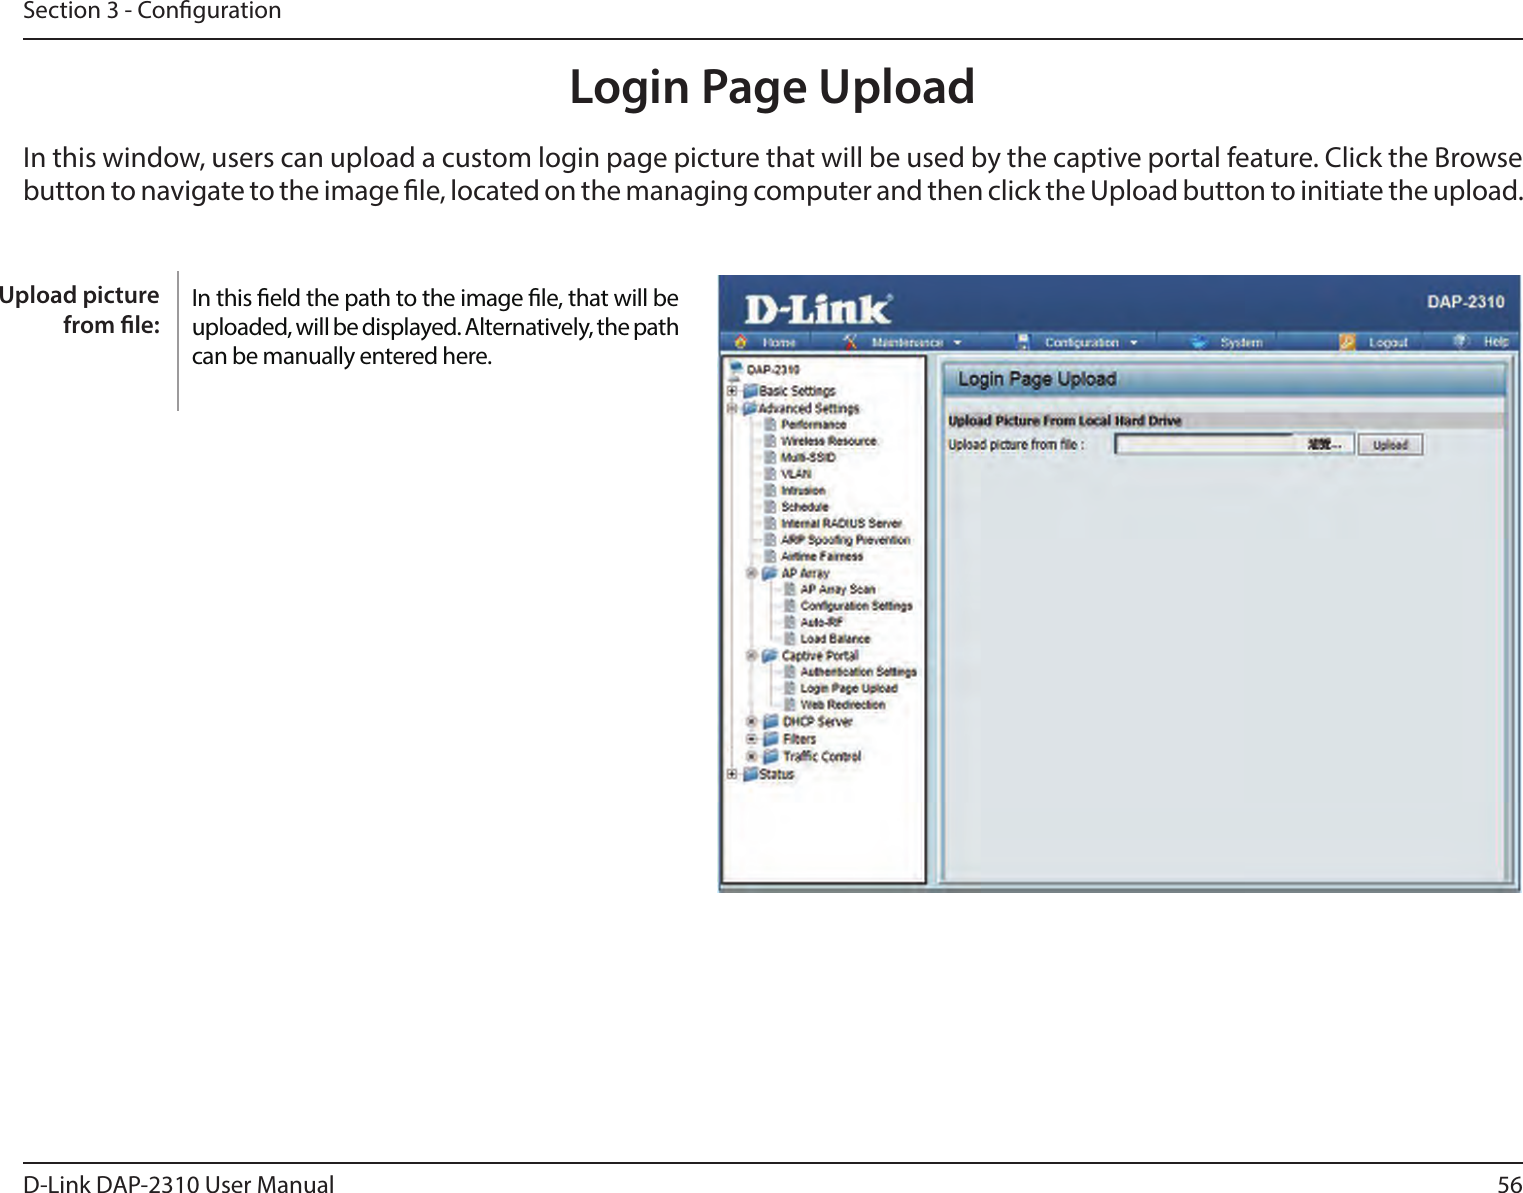 56D-Link DAP-2310 User ManualSection 3 - CongurationLogin Page UploadIn this window, users can upload a custom login page picture that will be used by the captive portal feature. Click the Browse button to navigate to the image le, located on the managing computer and then click the Upload button to initiate the upload.In this eld the path to the image le, that will be uploaded, will be displayed. Alternatively, the path  can be manually entered here.Upload picture from le: